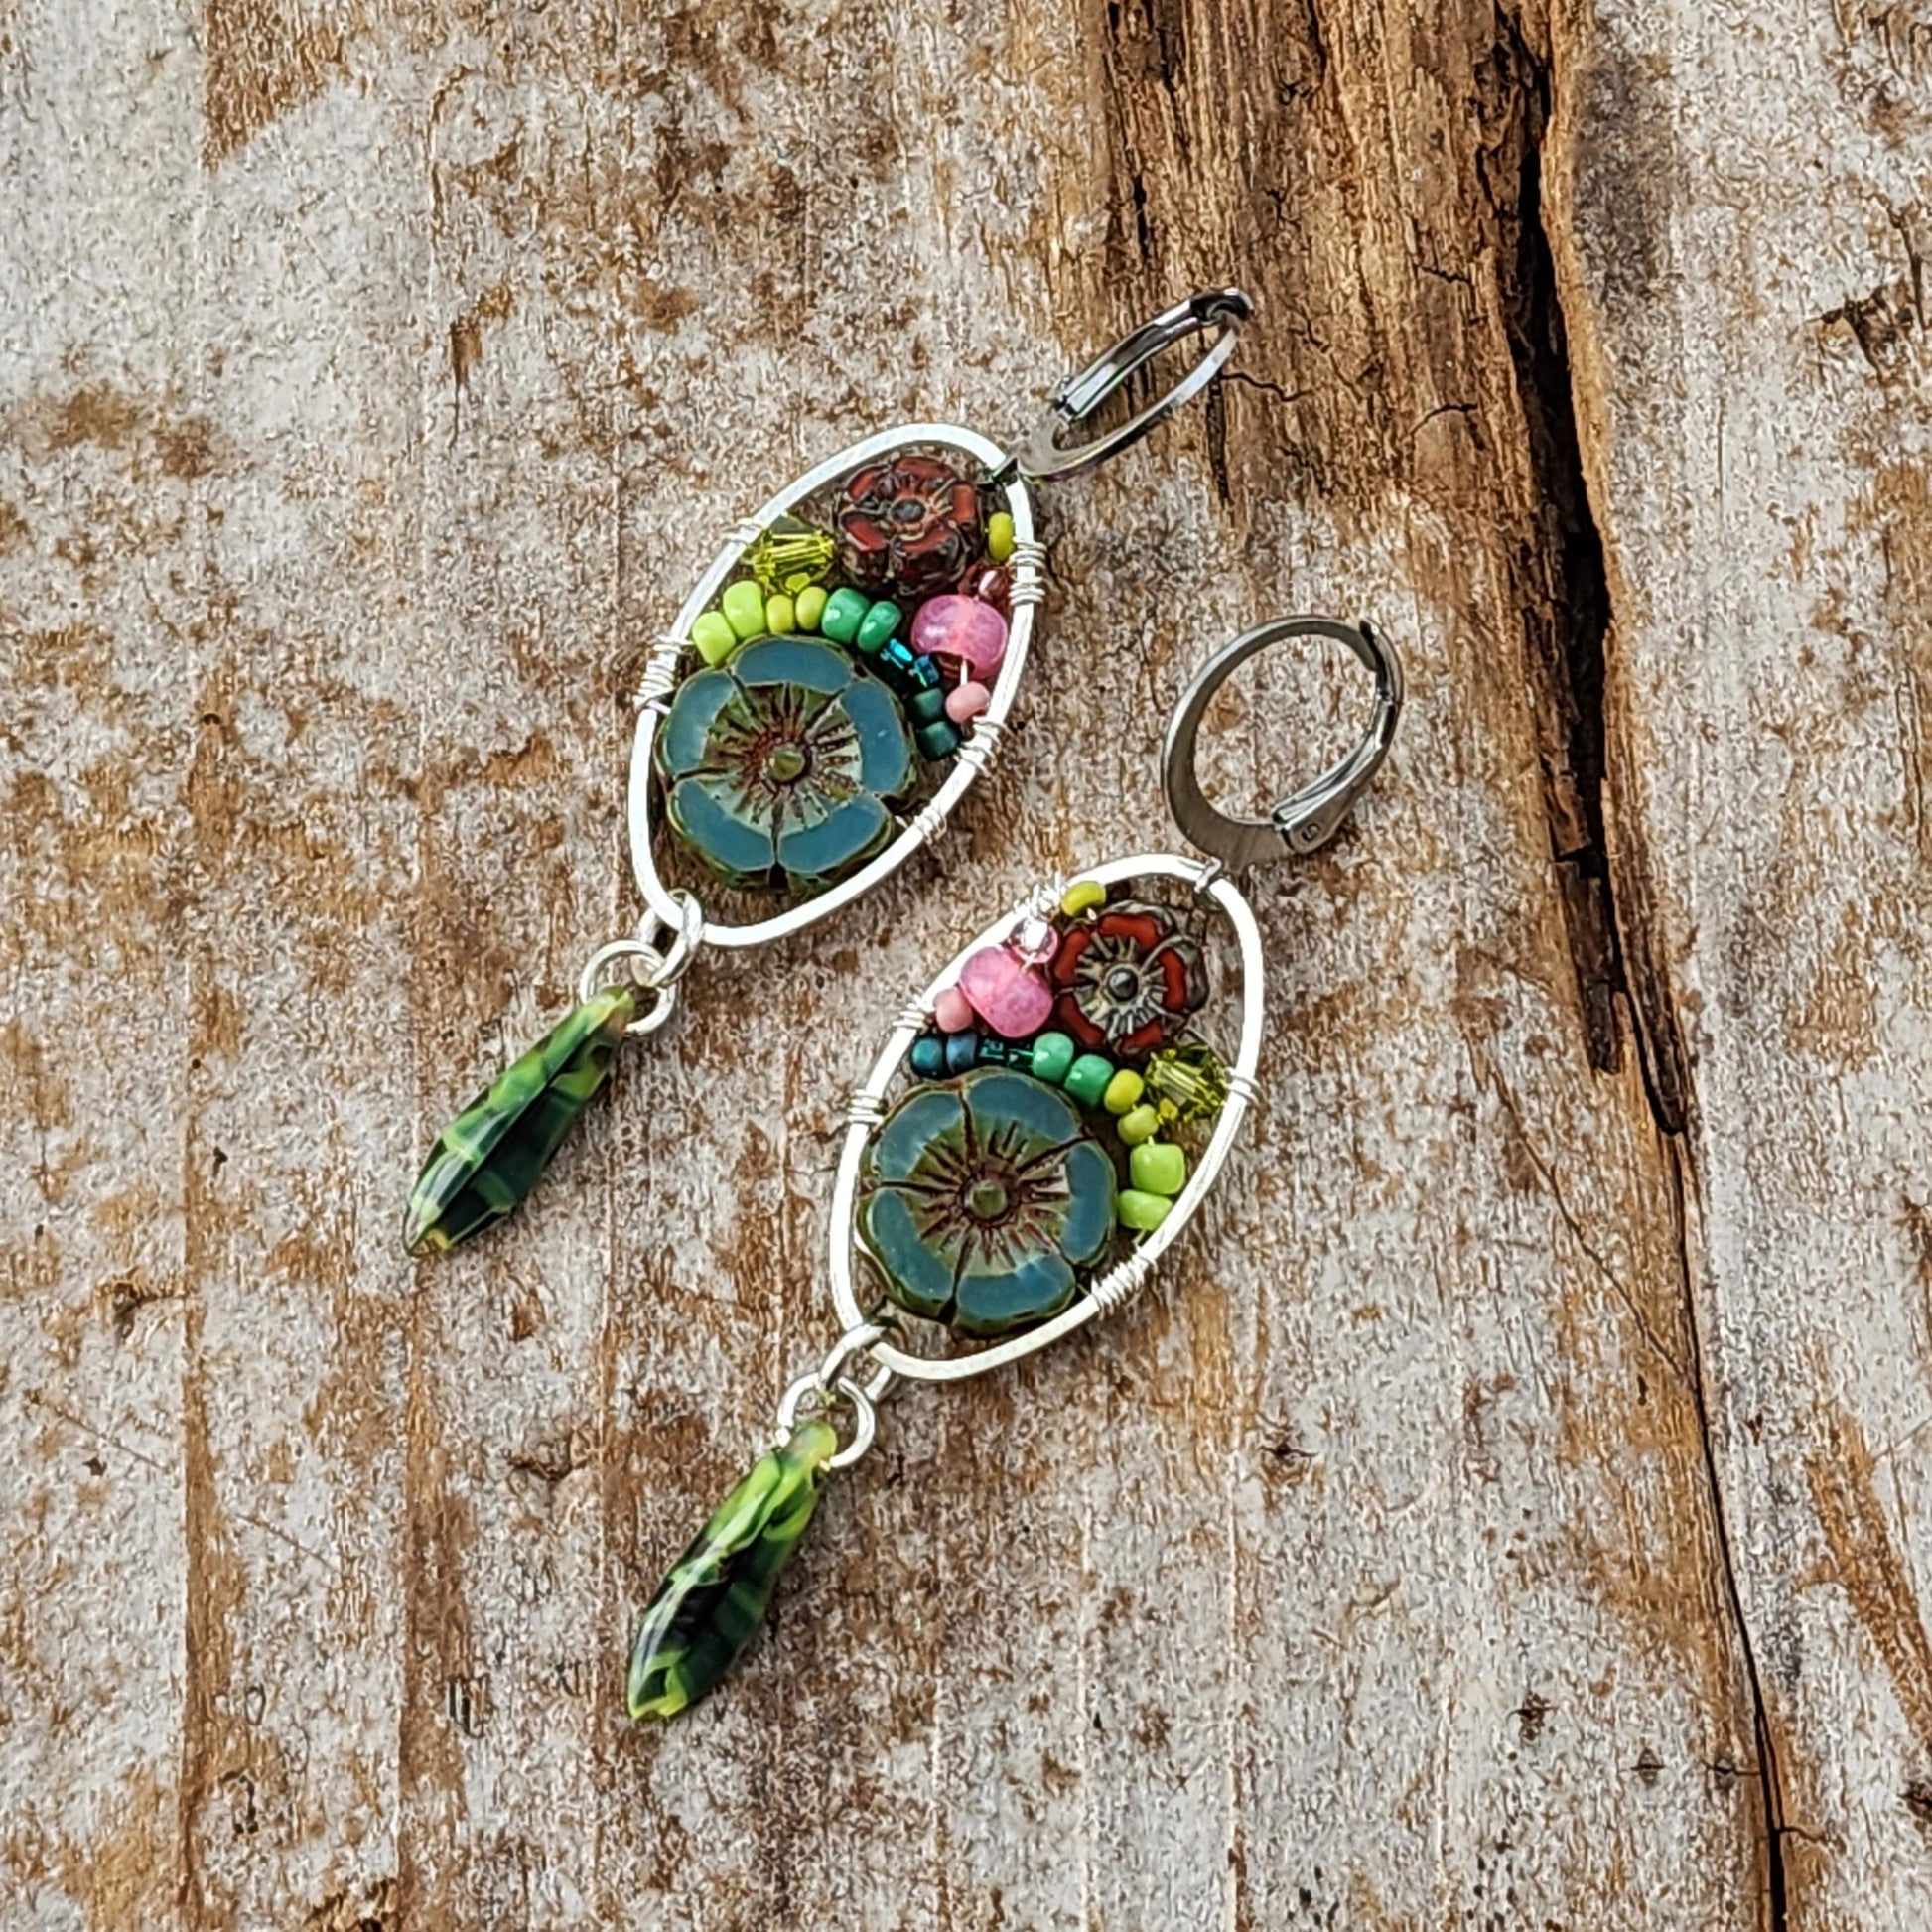 Dangle Earrings - Czech glass flowers, Swarovski, Japanese seed beads woven onto silver oval hoop. Stainless steel euro wires. Length about 2.25"